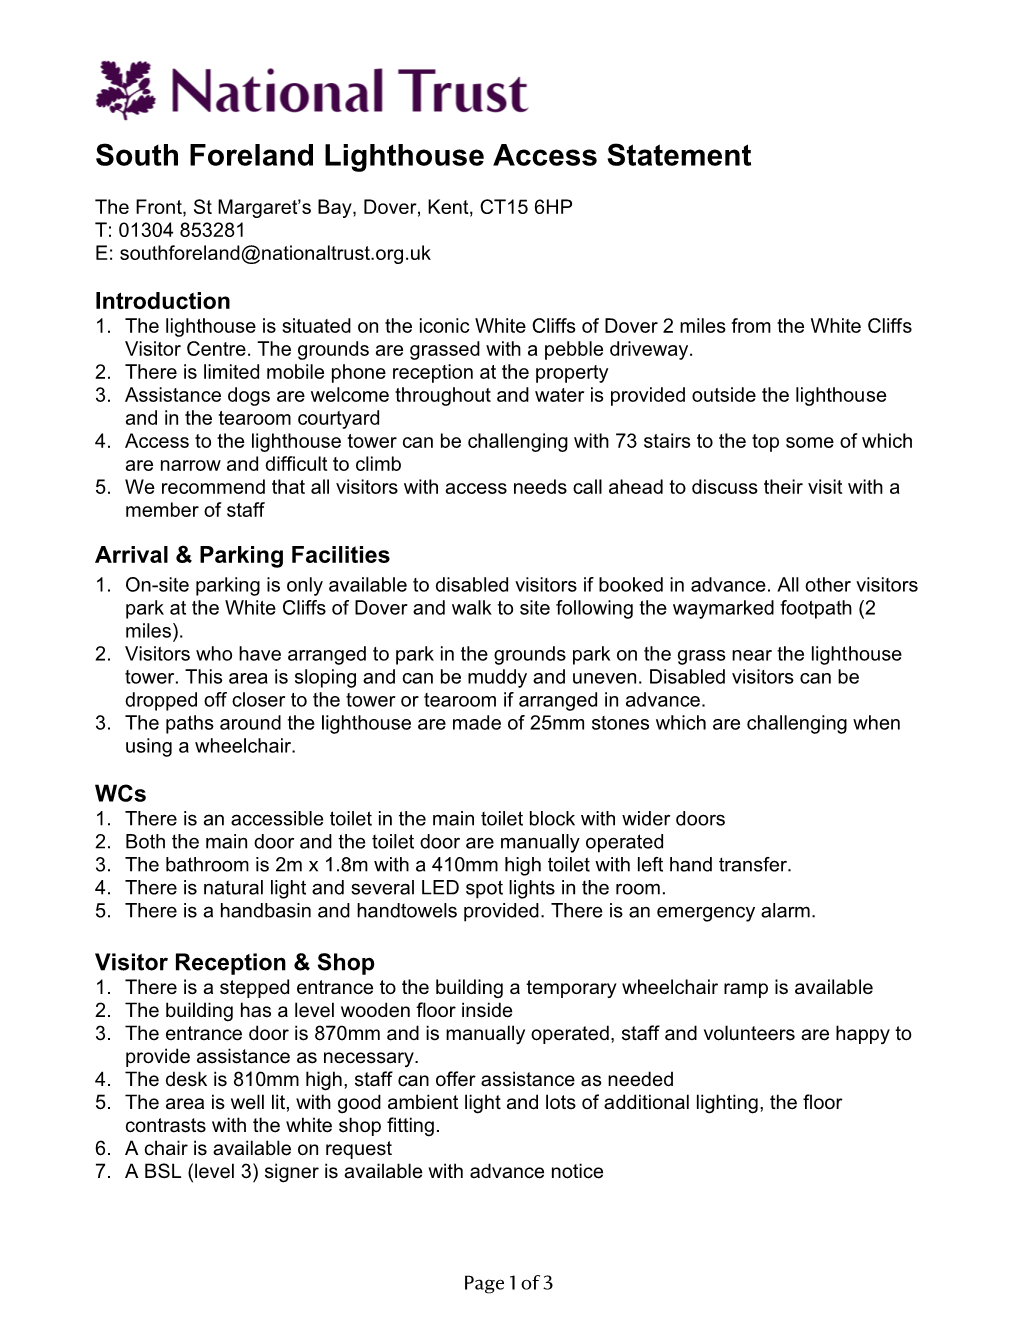 South Foreland Lighthouse Access Statement